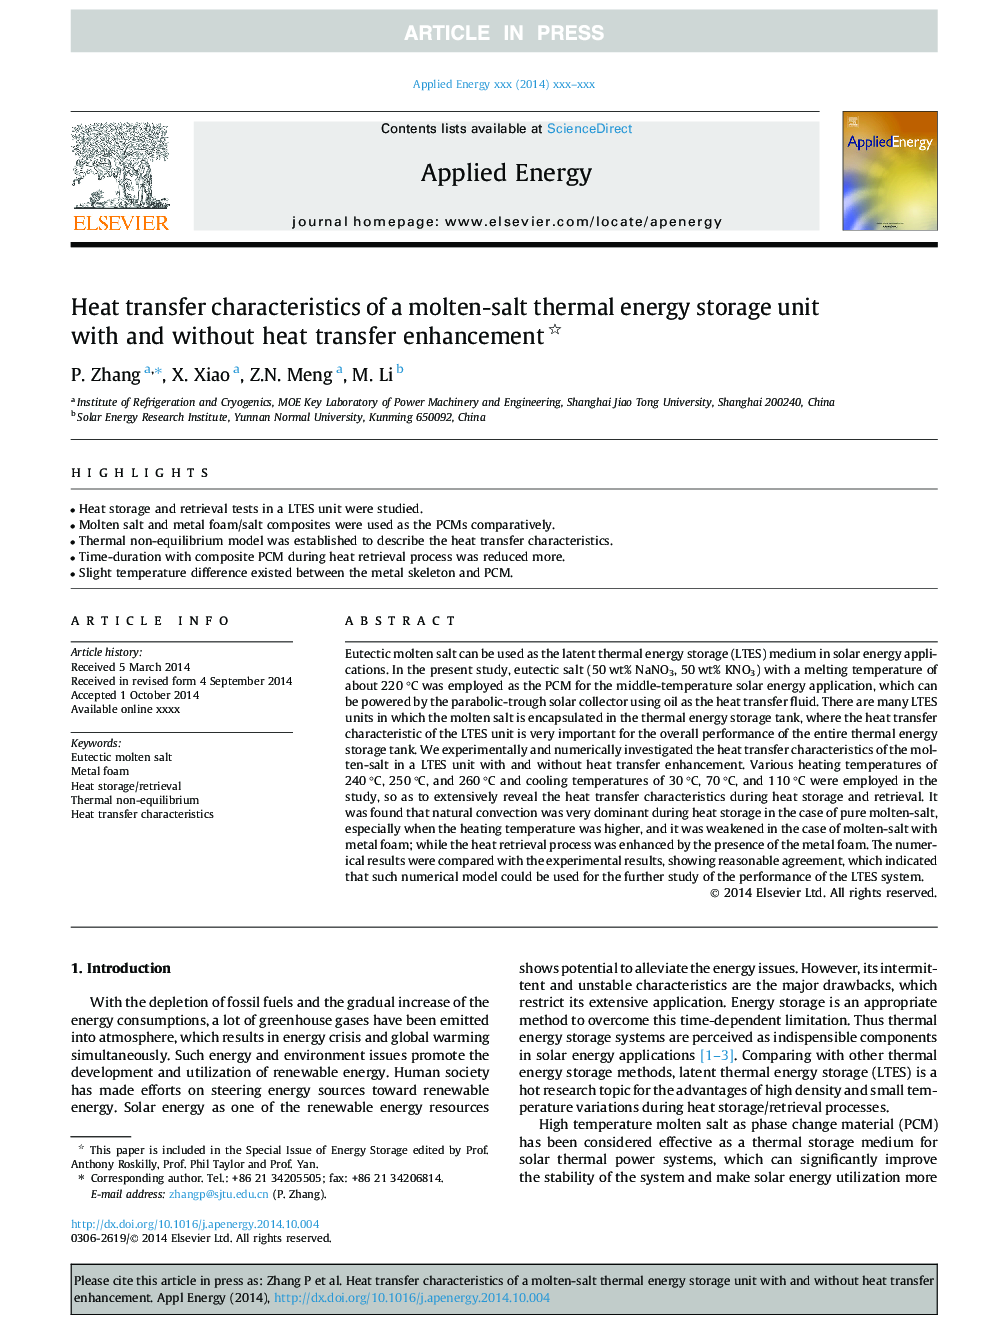 Heat transfer characteristics of a molten-salt thermal energy storage unit with and without heat transfer enhancement